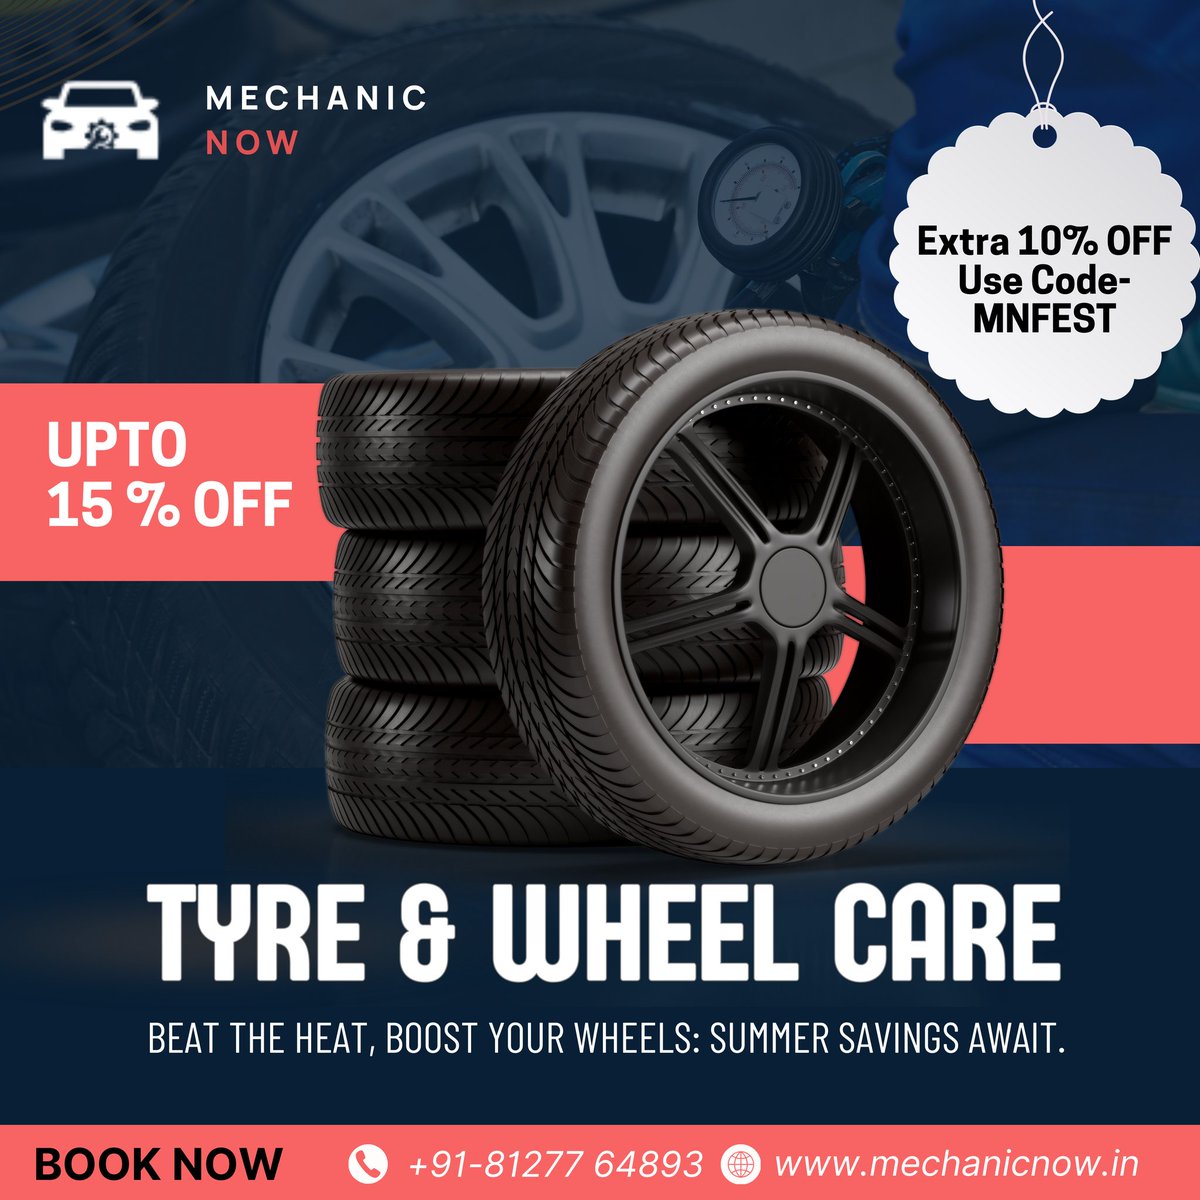 Elevate your ride with our premium tyre and wheel care service. Smooth, safe travels are just a service away!  

#Tyrecare #Wheelservice #Drivewithconfidence 
#Autocare #Expertservice #Serviceprovider #Autorepair #Repairservices #Automotivetechnician #Autobdyrepair